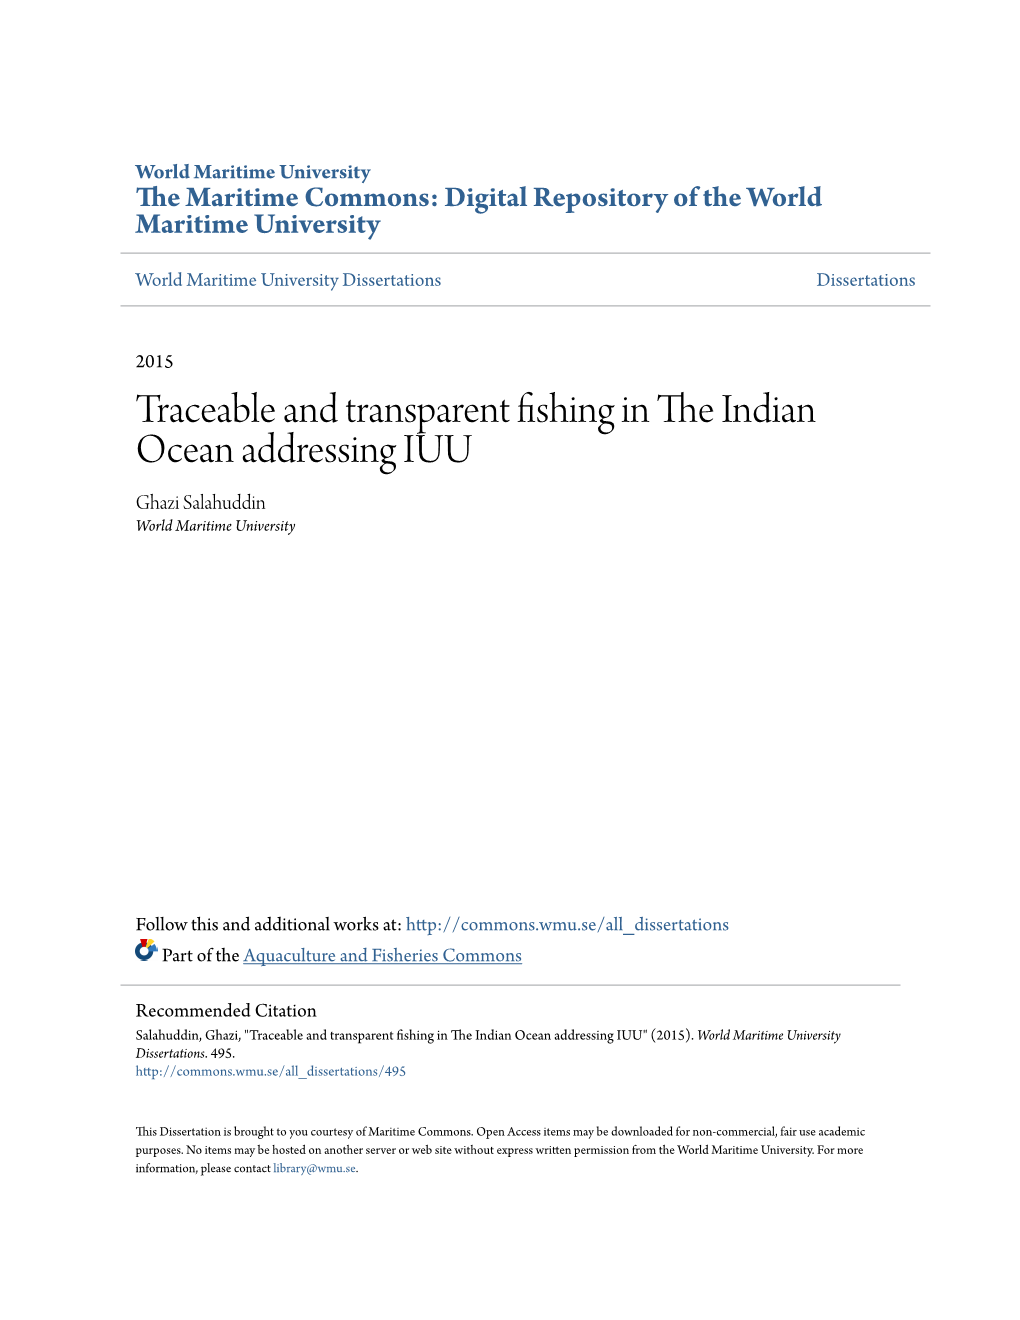 Traceable and Transparent Fishing in the Indian Ocean Addressing Iuu